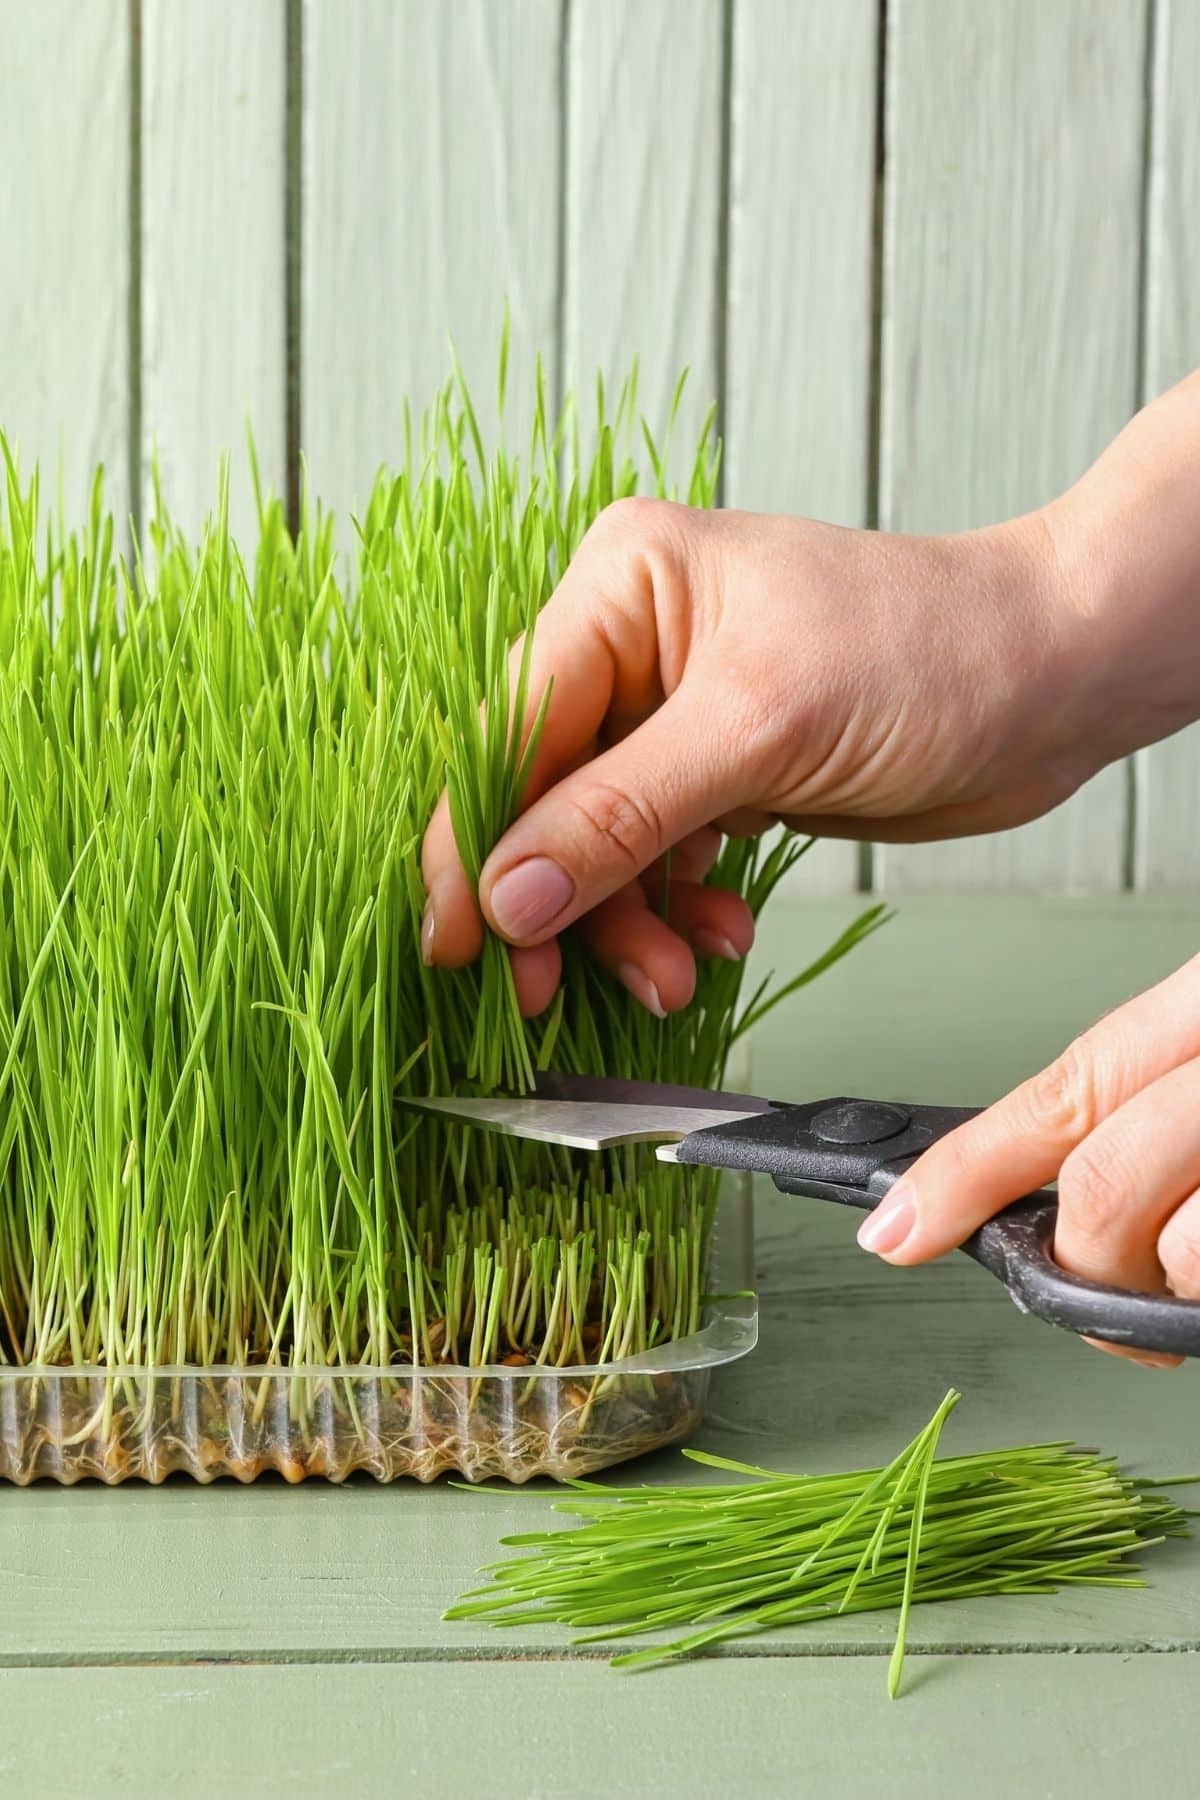 Two hands snipping wheatgrass from an indoor tray.